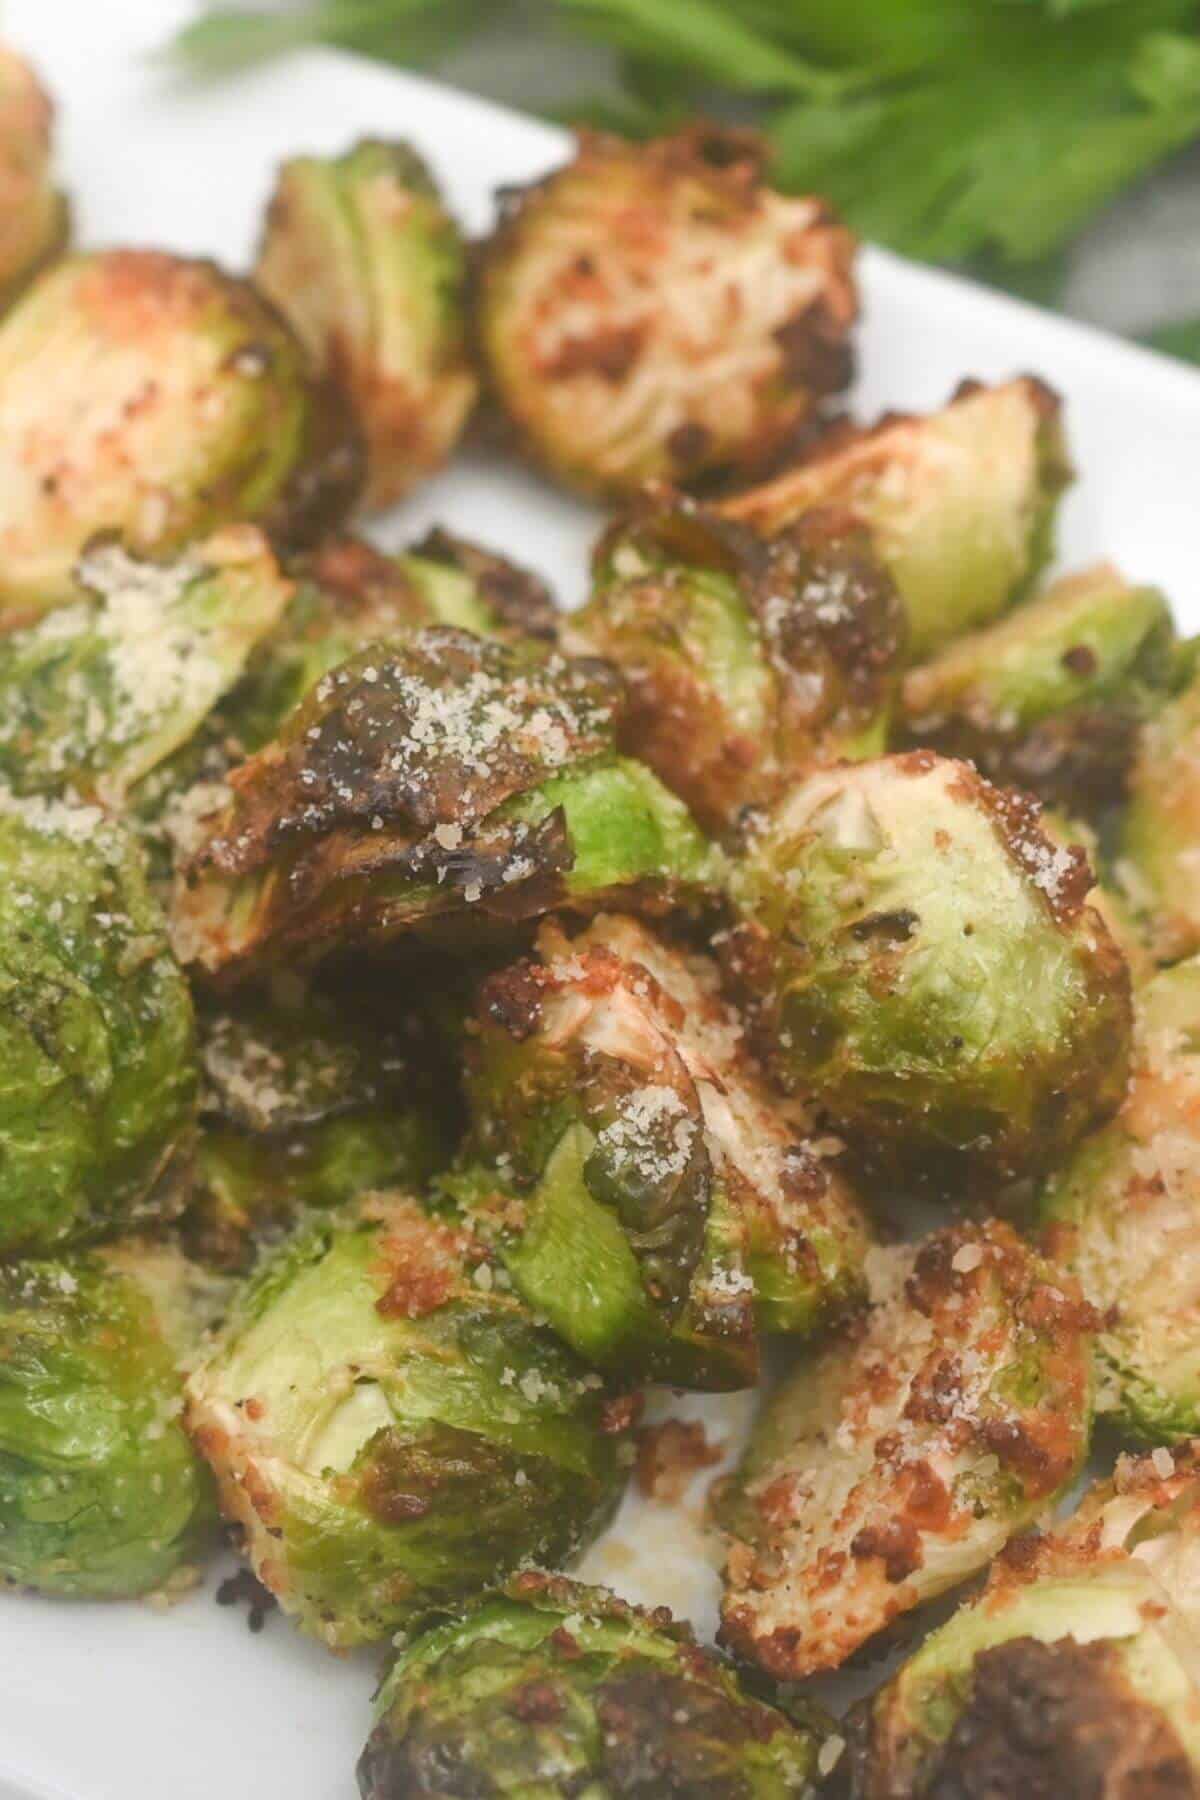 Roasted brussels sprouts on a white plate.